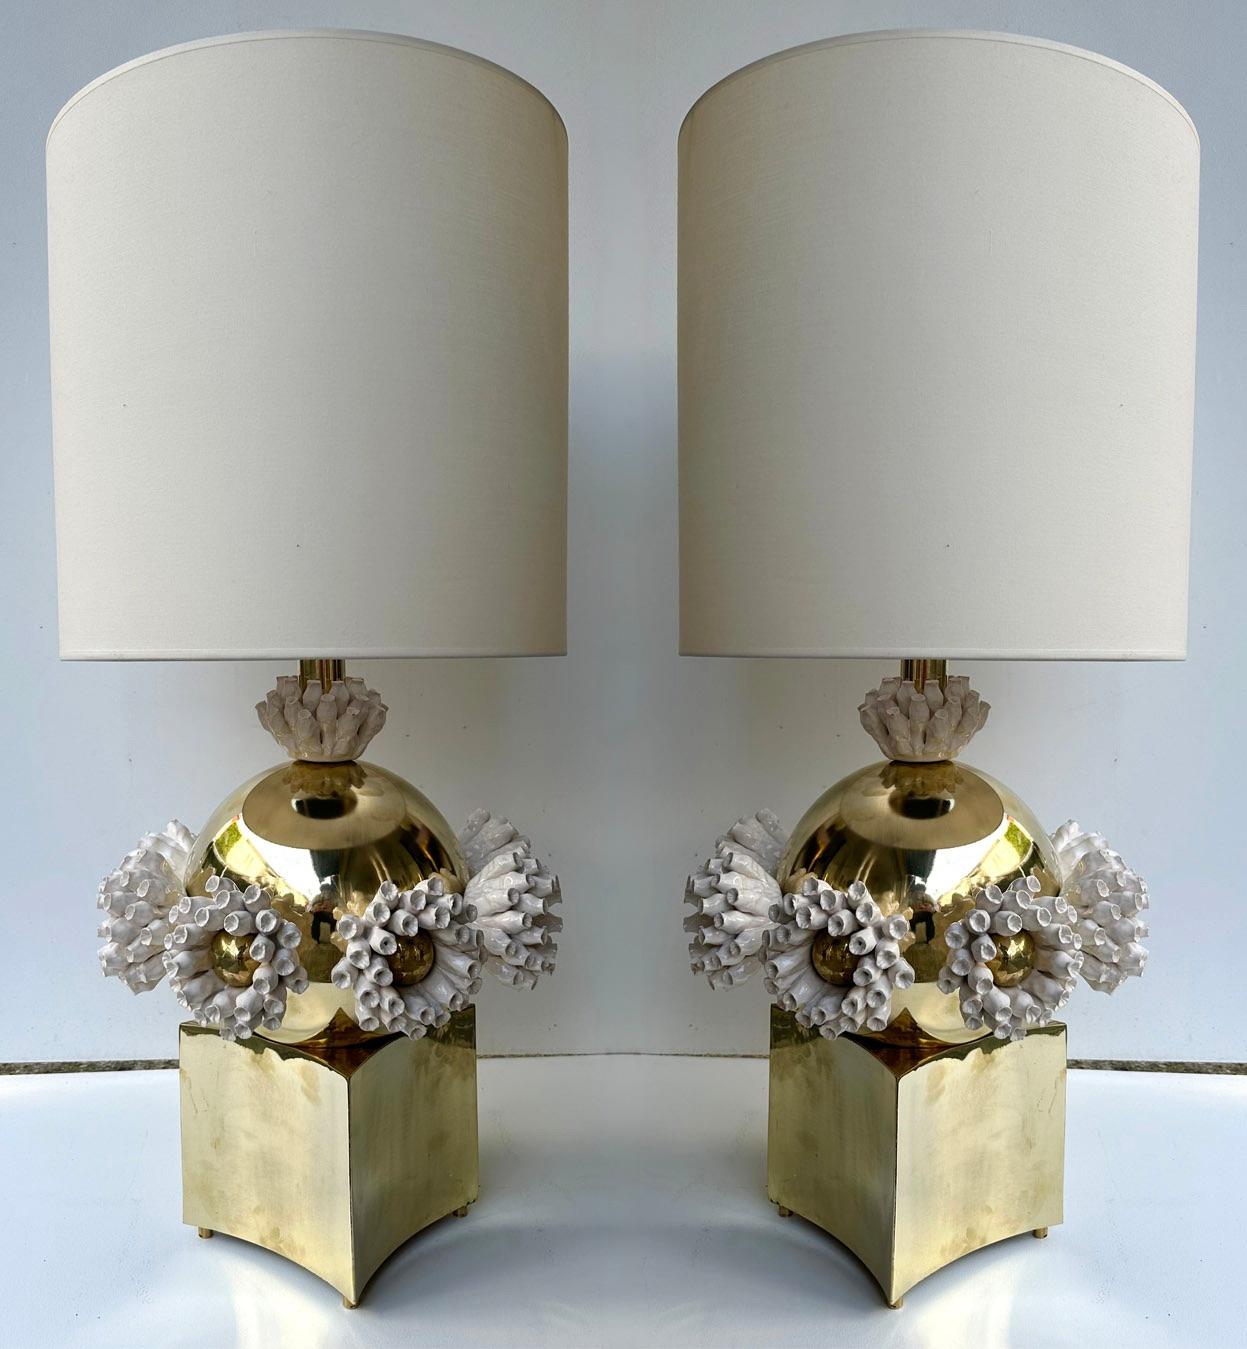 Pair of table or bedside brass lamps with anemone ceramic terracotta decor. Contemporary work from a small italian artisanal workshop in a Mid-Century Modern Space Age Hollywood Regency mood

Measurements indicated in description with demo